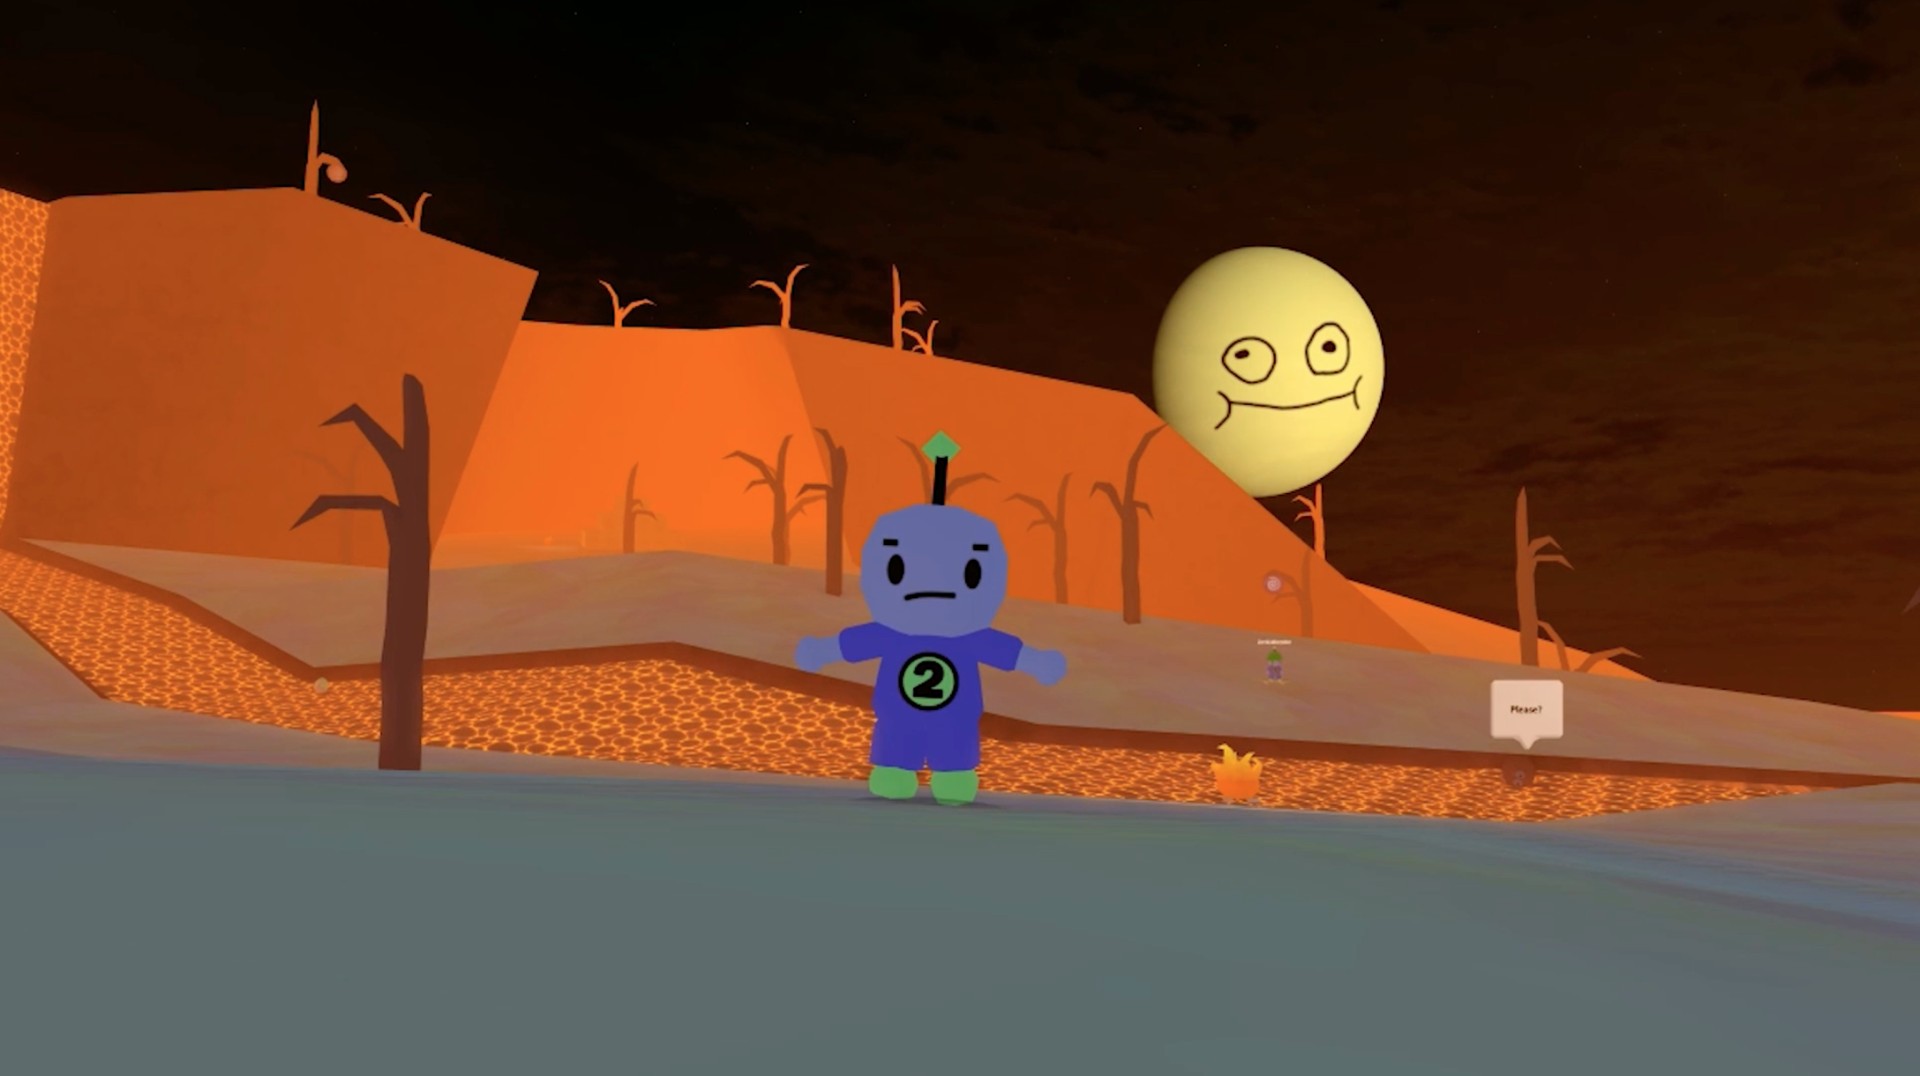 3d Platformer Robot 64 Is Now Available On Roblox For Xbox One Xbox Wire - how to beat cleaning simulator roblox